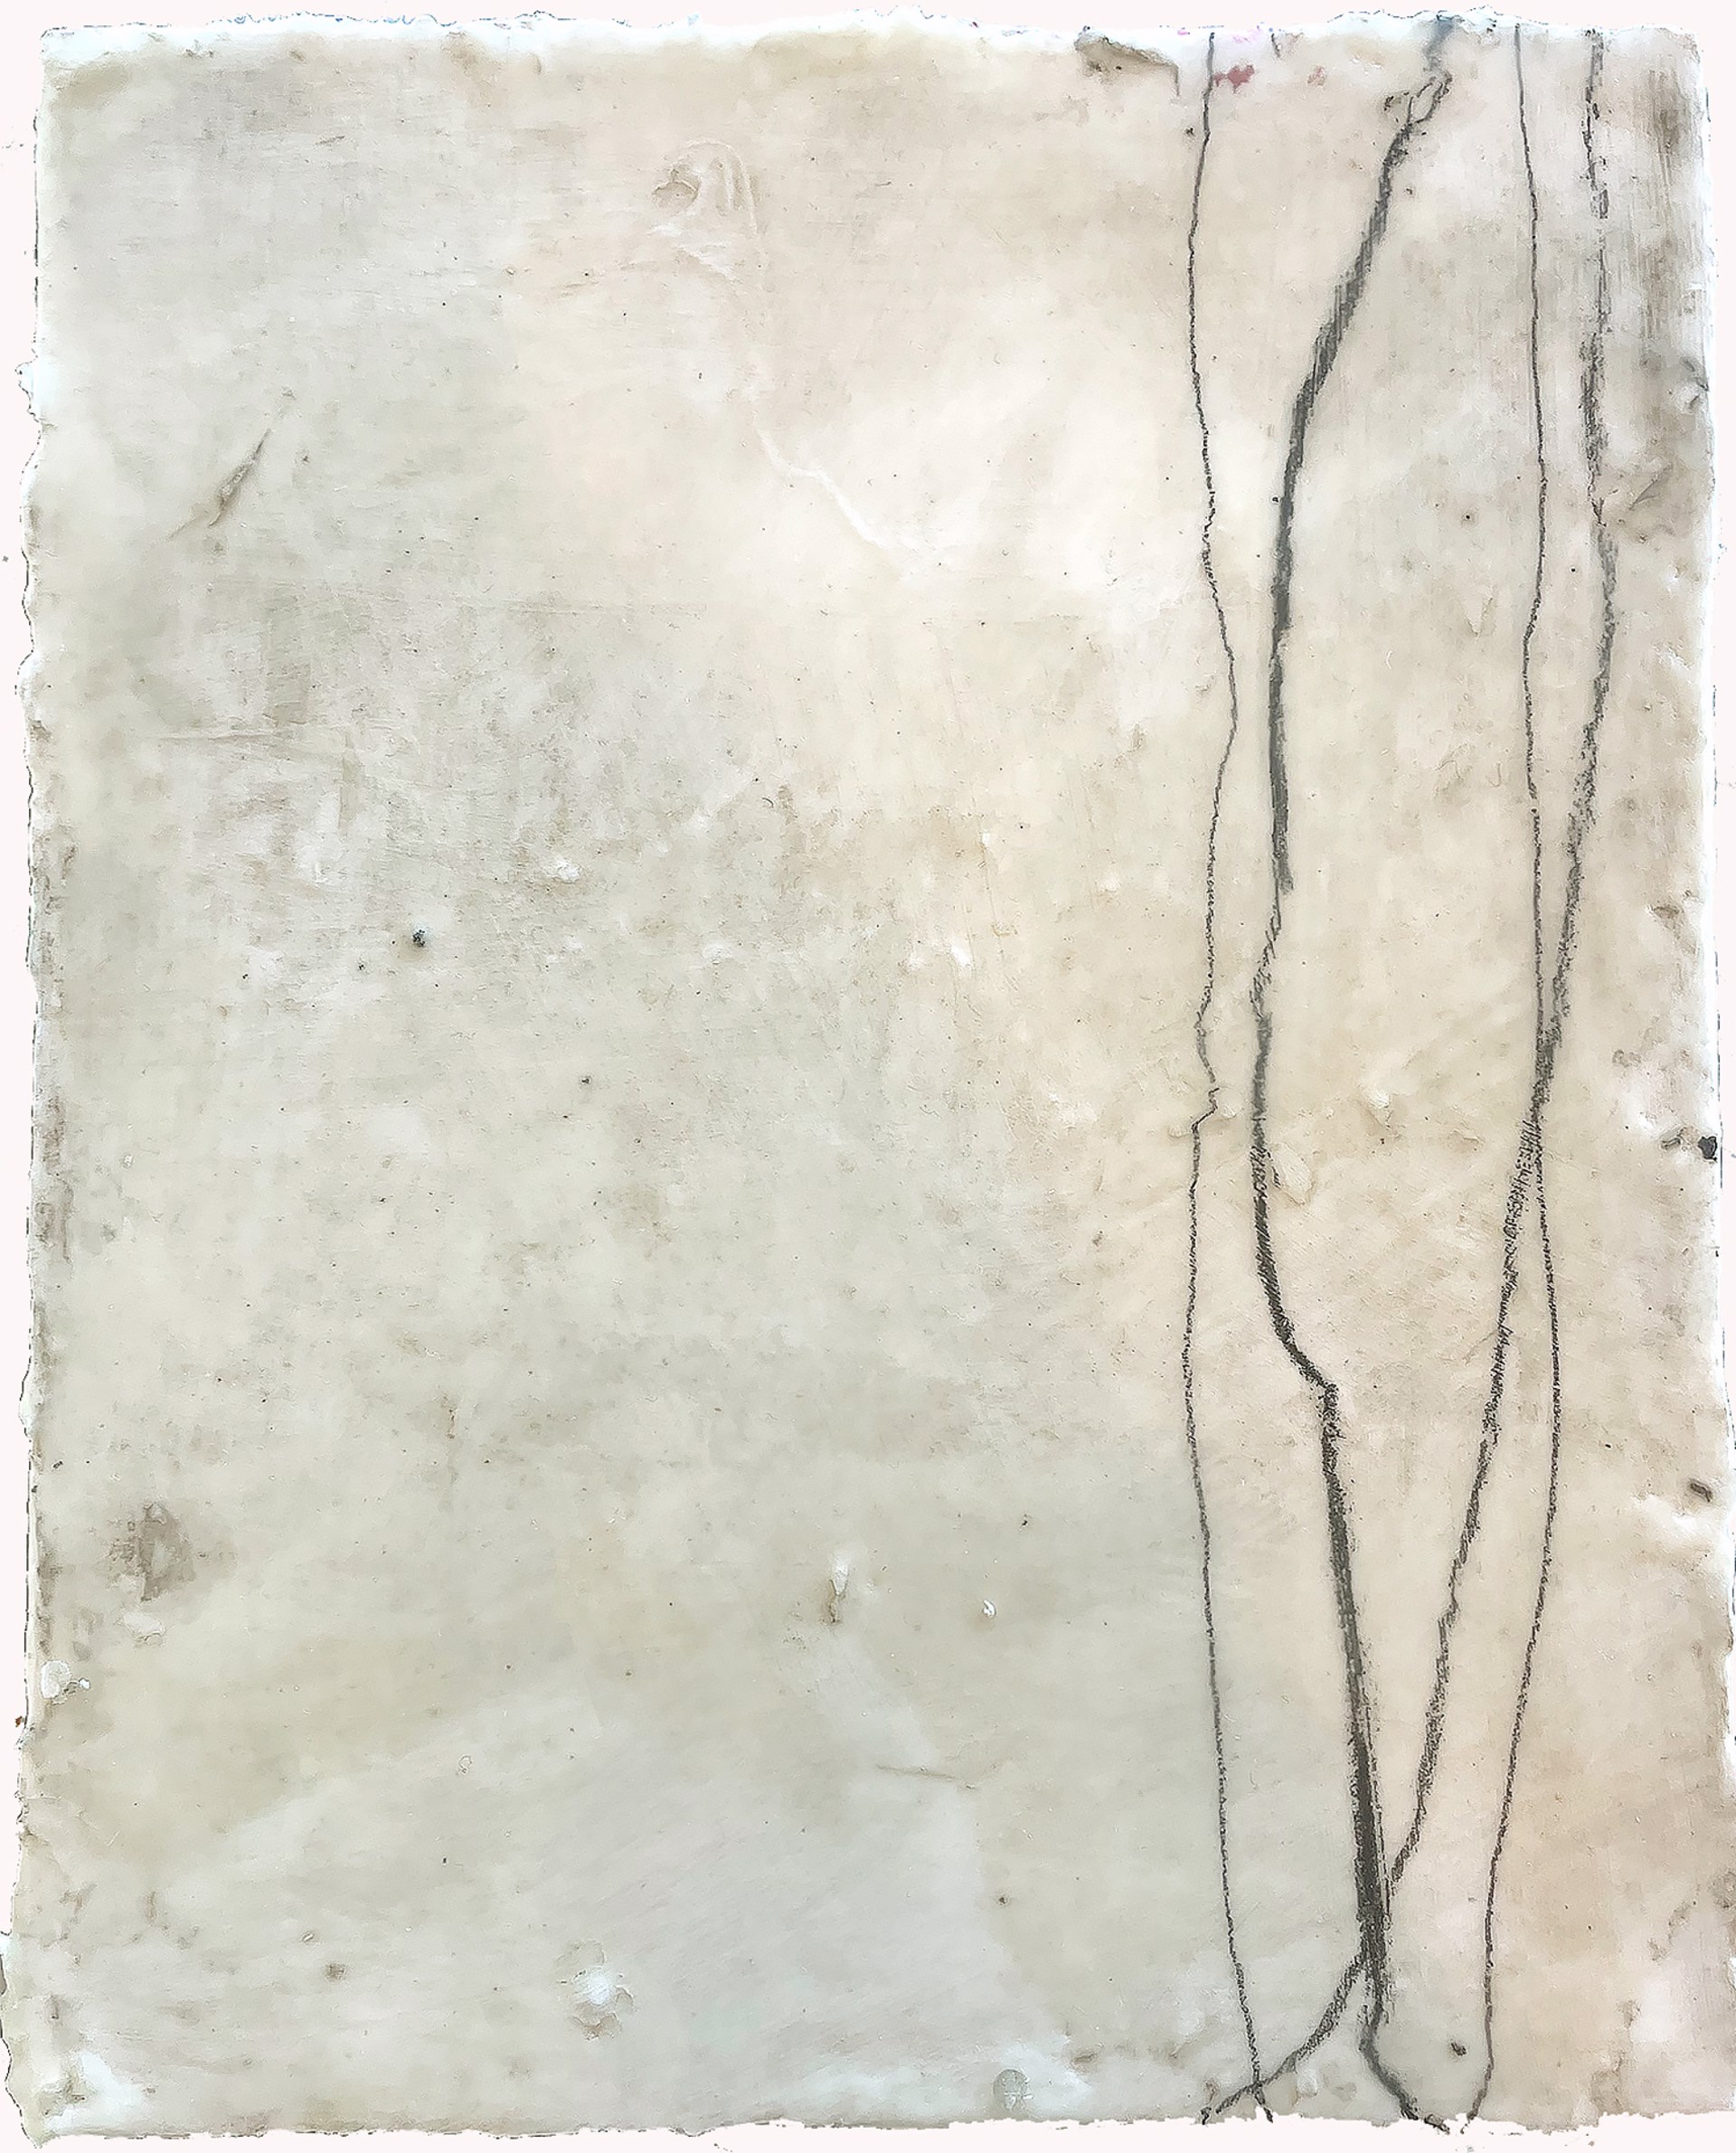 Study for String Drawing III by Meredith Pardue